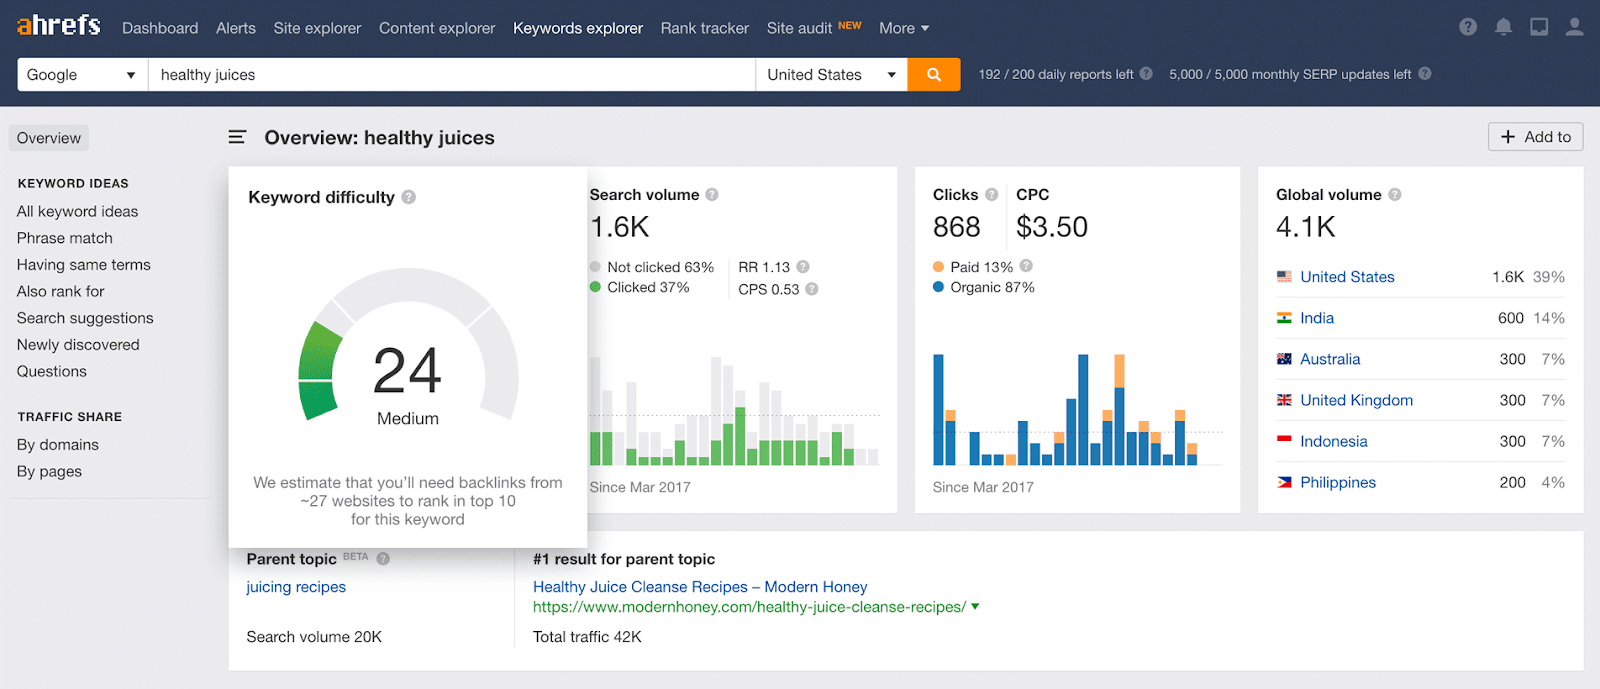 AHREFS keyword research tool: Image source